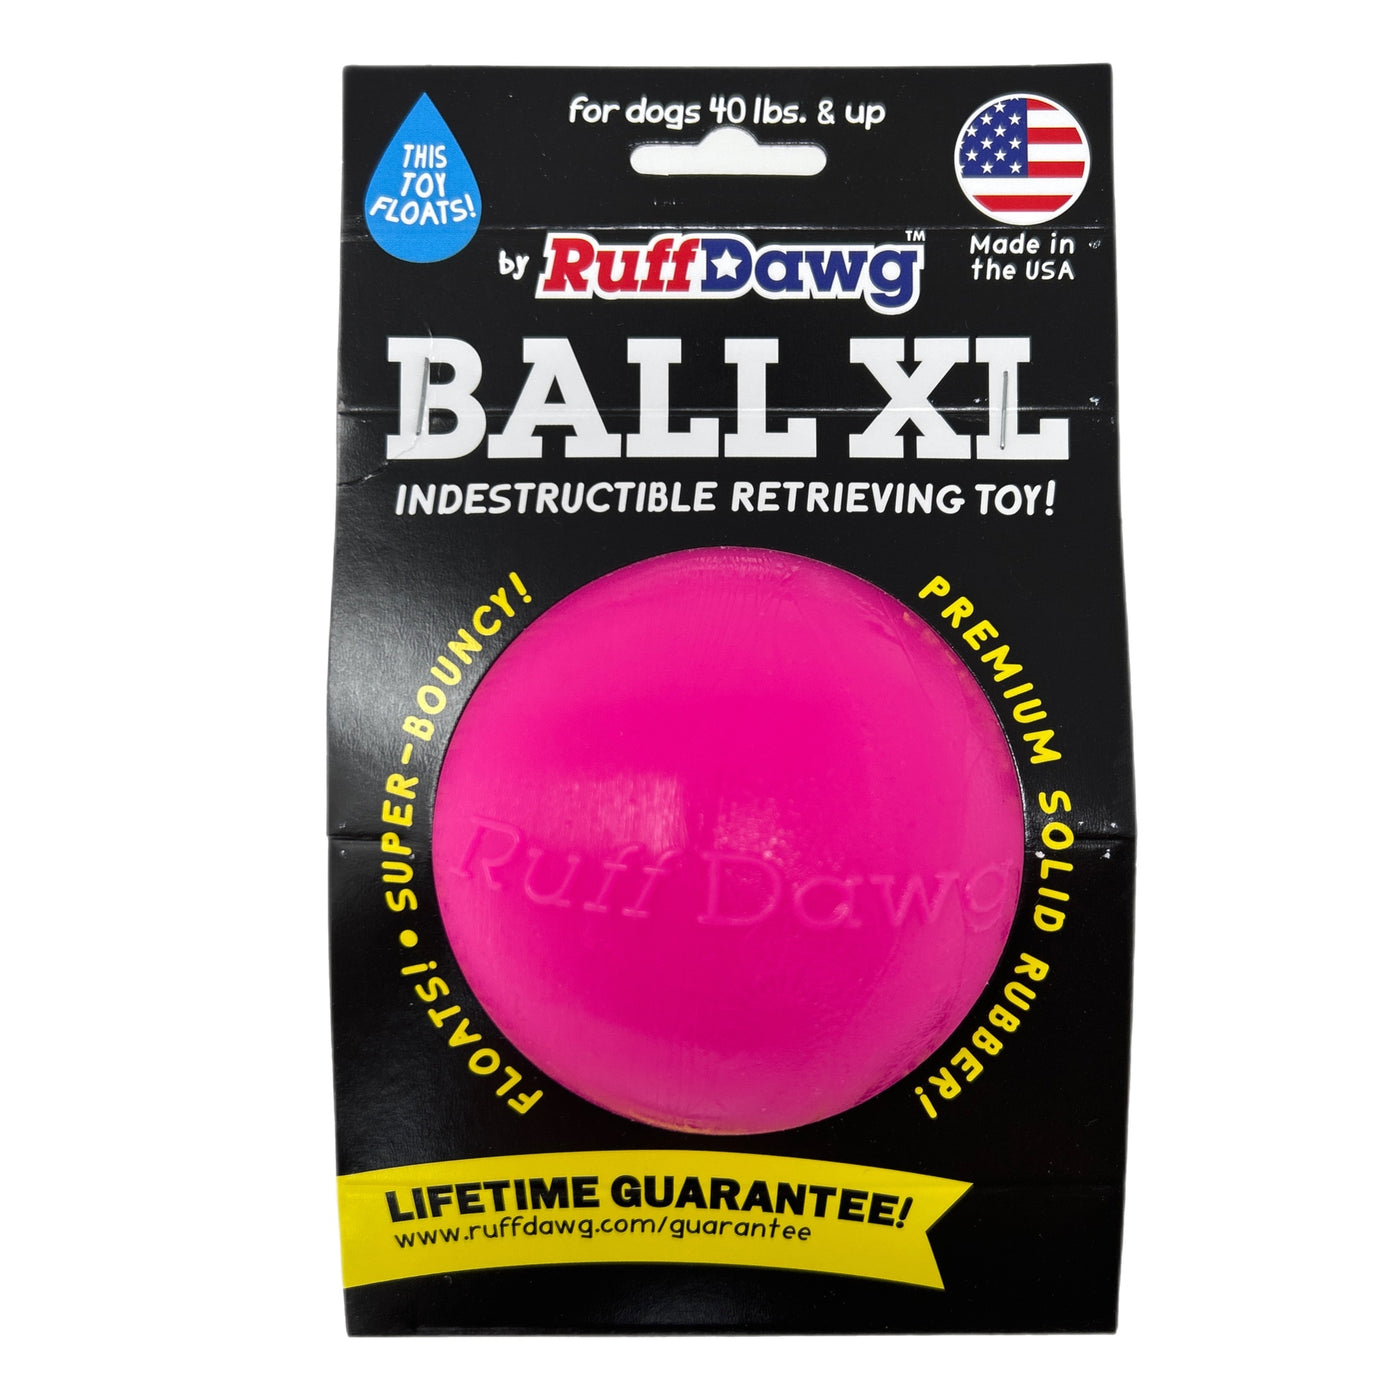 Rubber Ball Dog Toy By RuffDawg